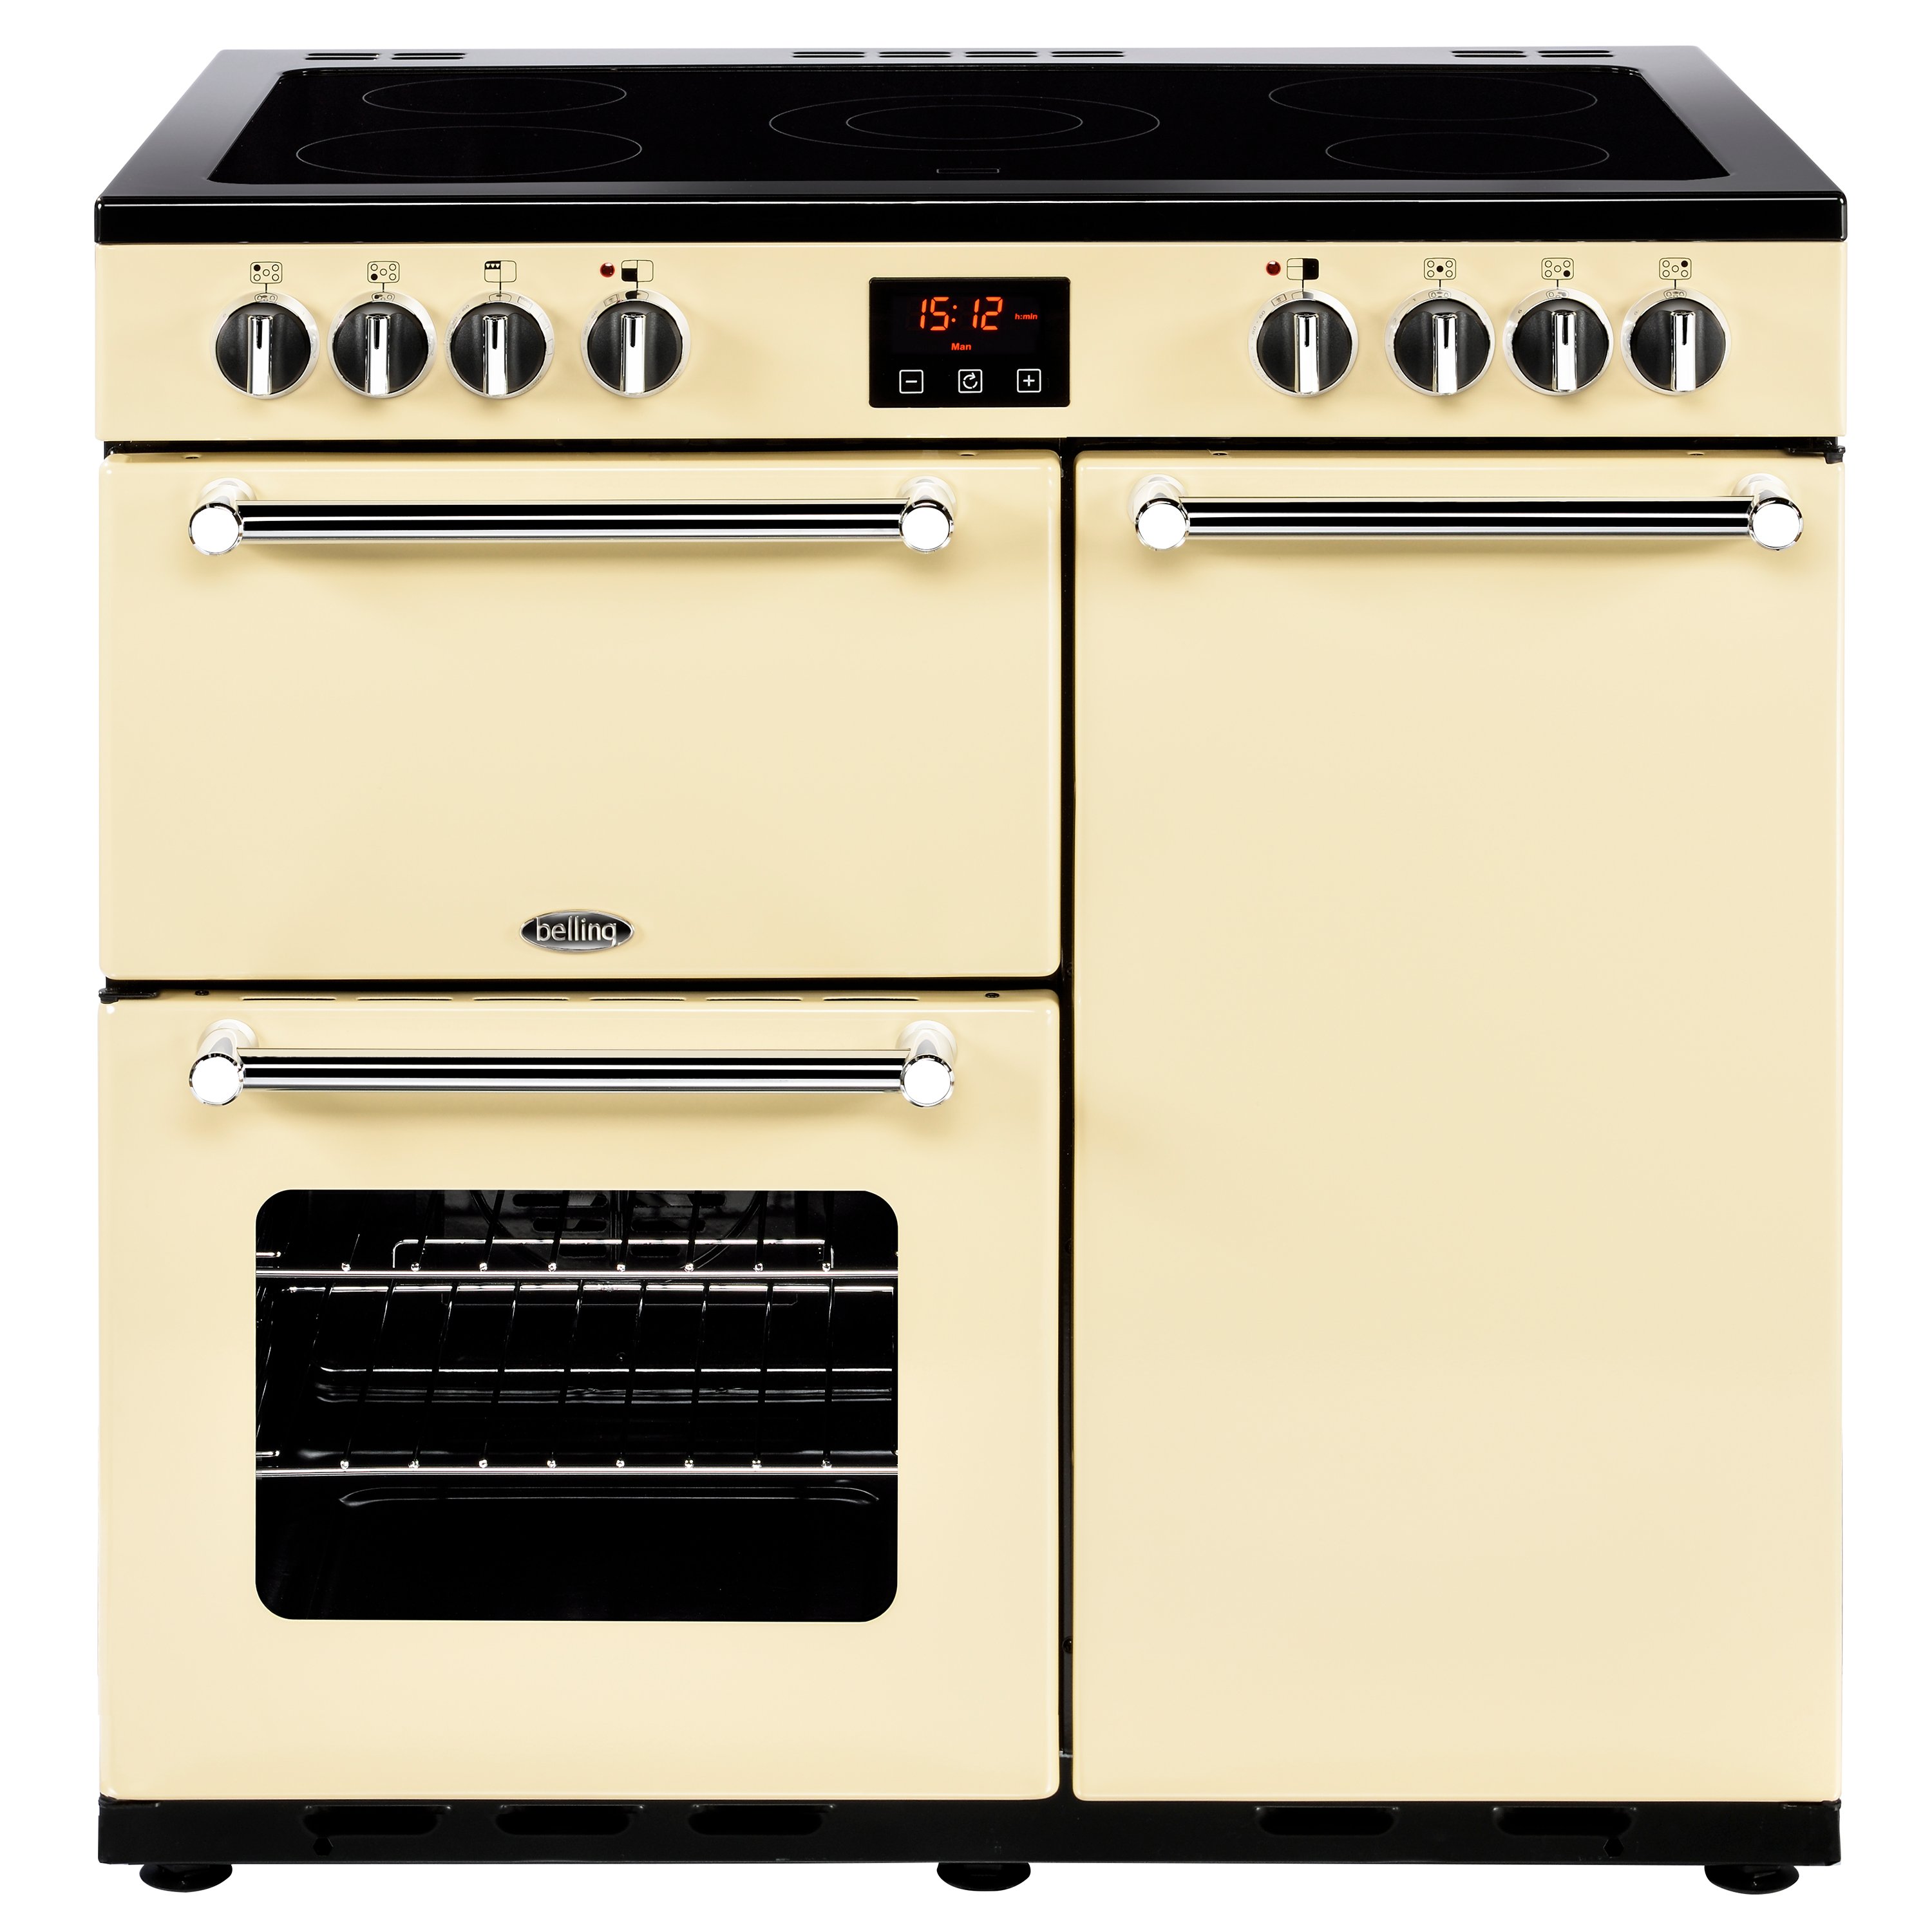 90cm electric range cooker with 5 zone ceramic hob, conventional oven & grill, fanned main oven and tall fanned oven.